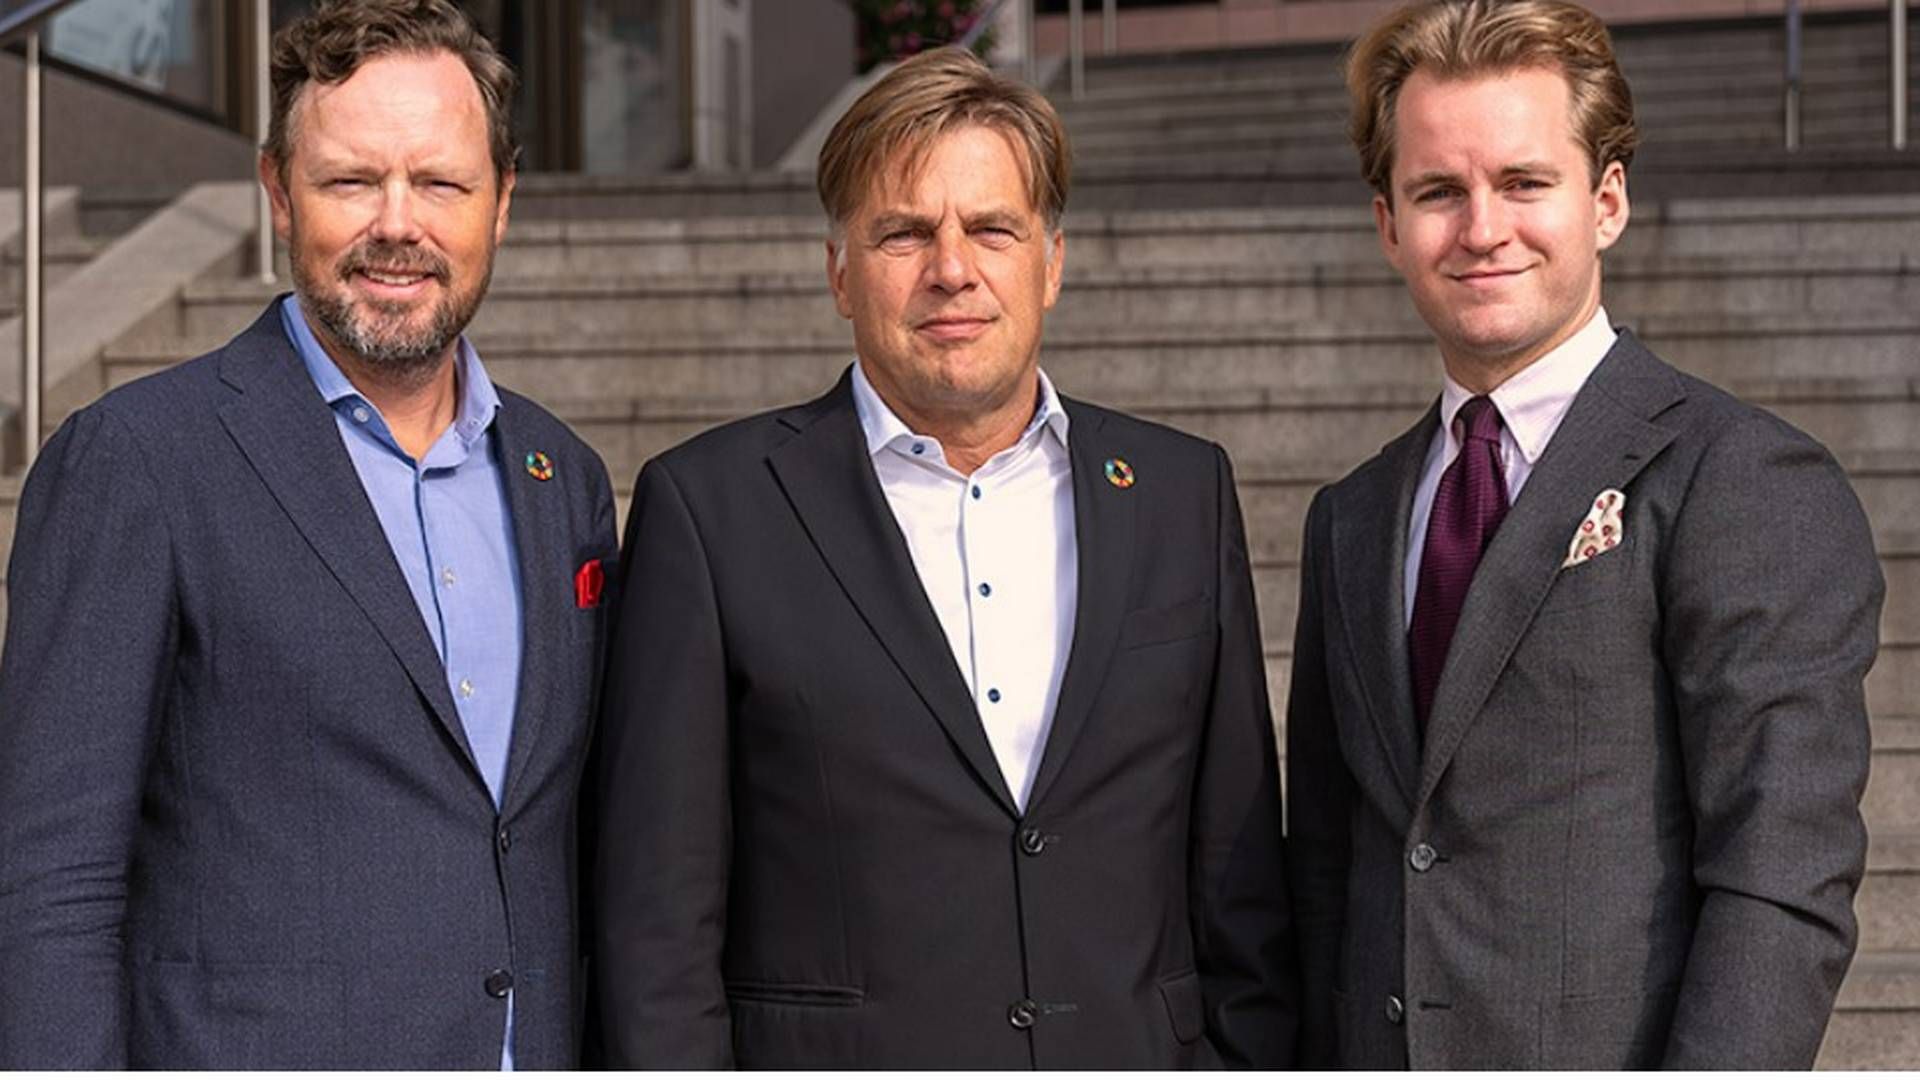 From left: The portfolio managers Joakim By, Christoffer Halldin and Simon Park who were all poached from Handelsbanken Fonder last year to take charge of Coeli's sustainable "Circulus" strategy. | Photo: PR/Coeli